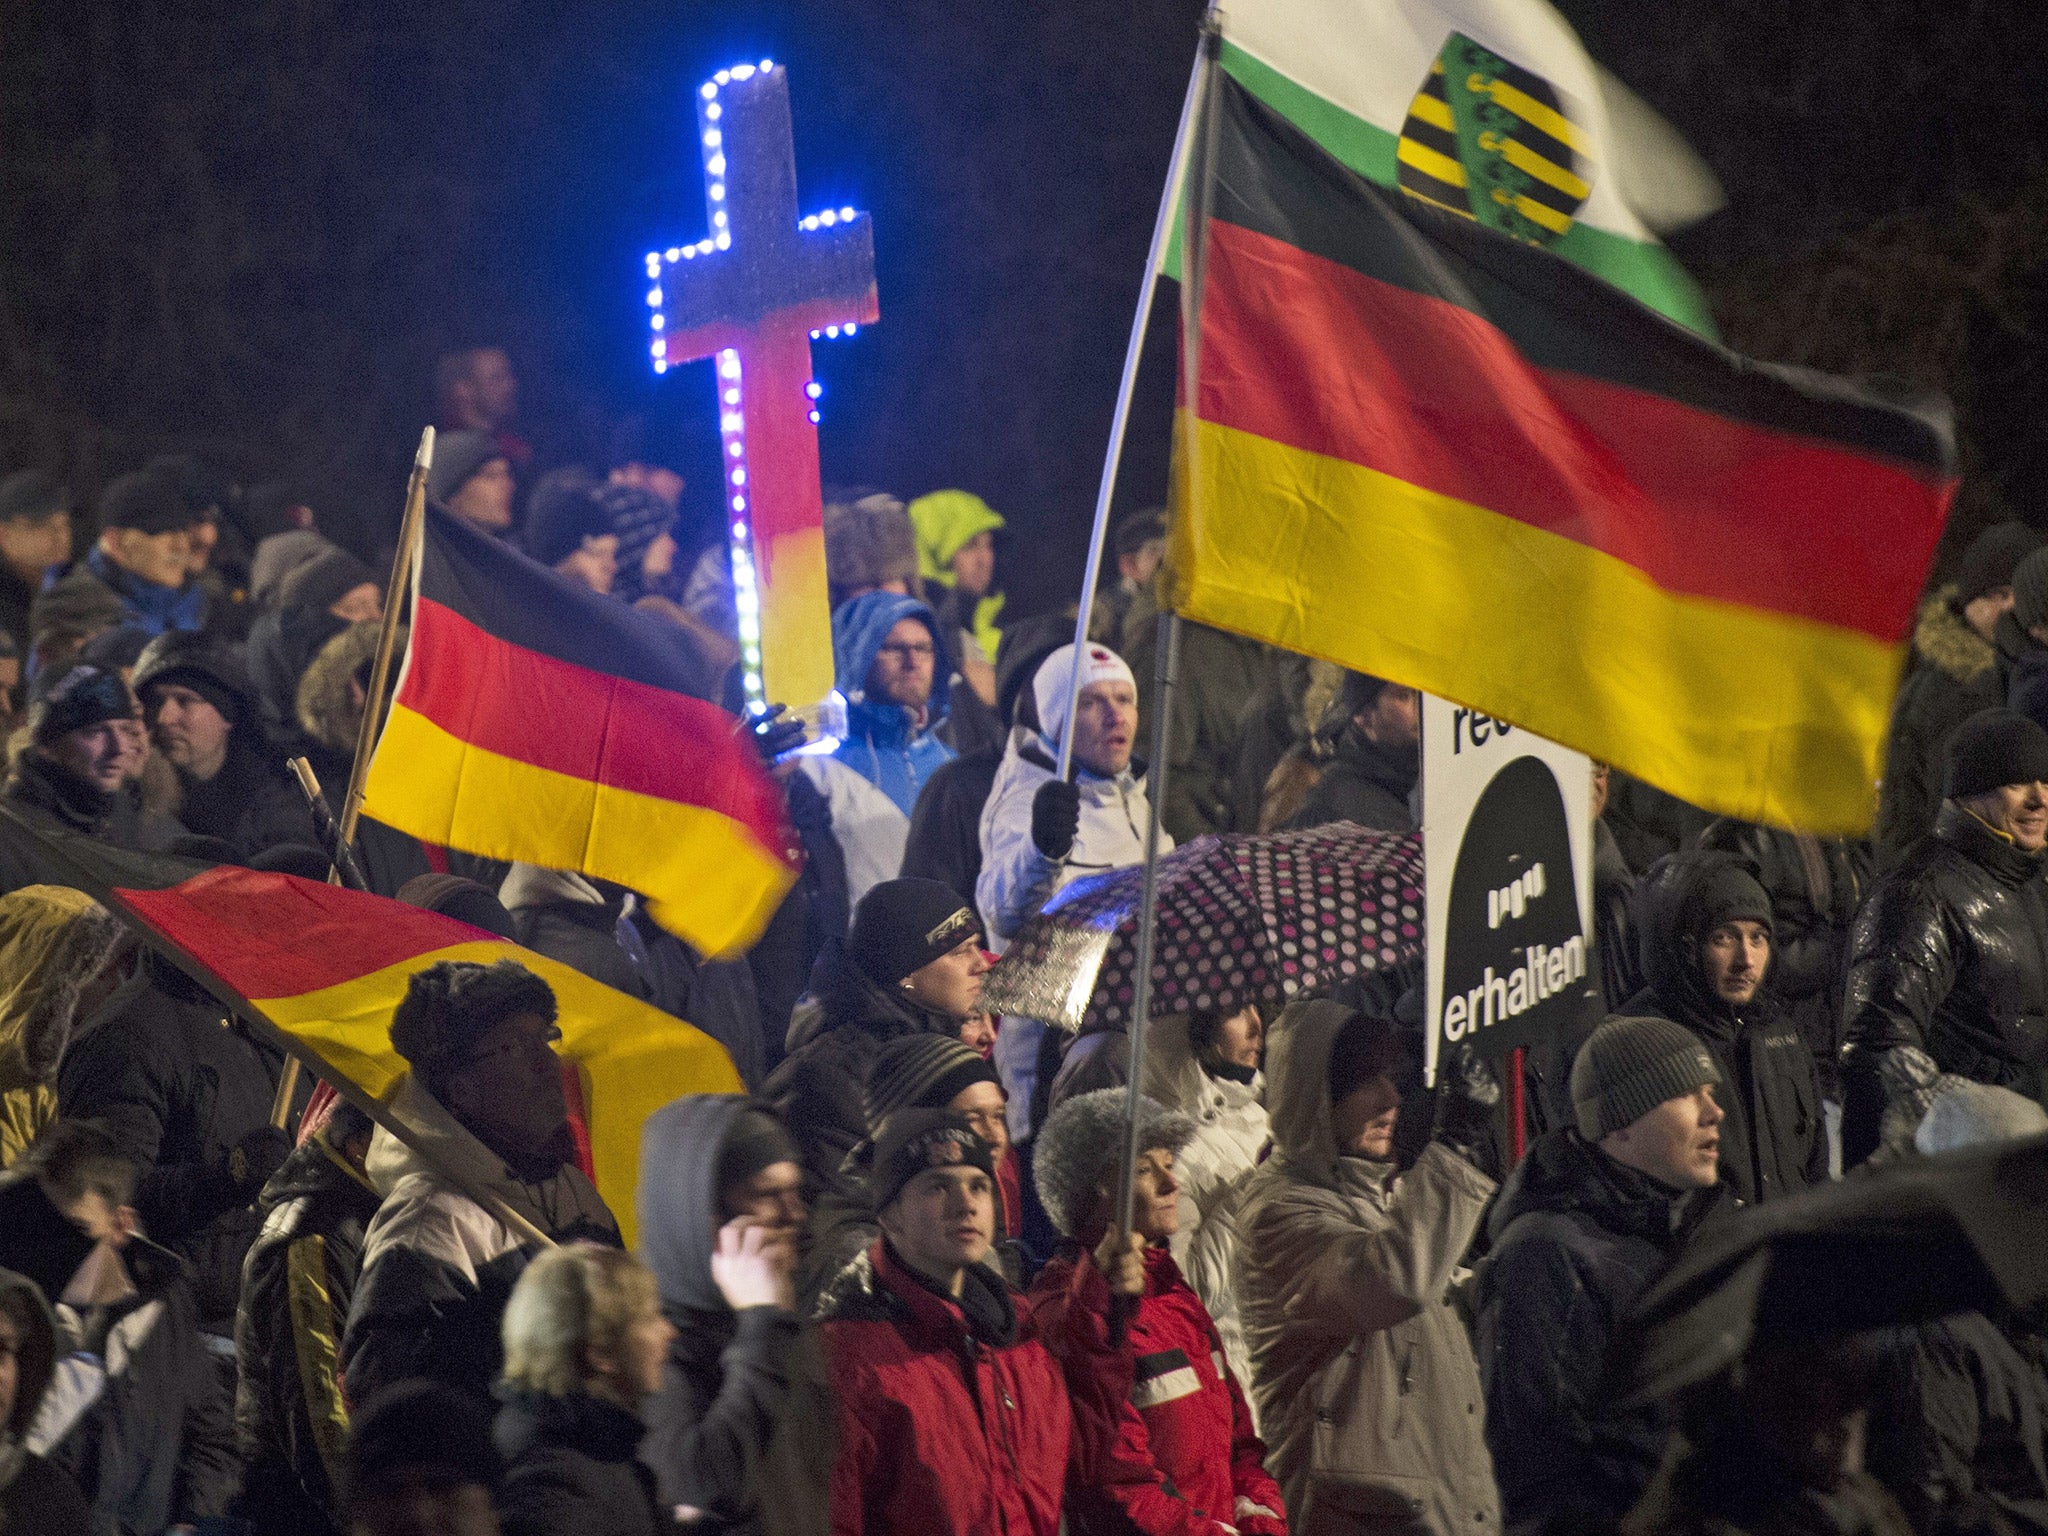 Demonstrators at an anti-Islamic rally in Dresden